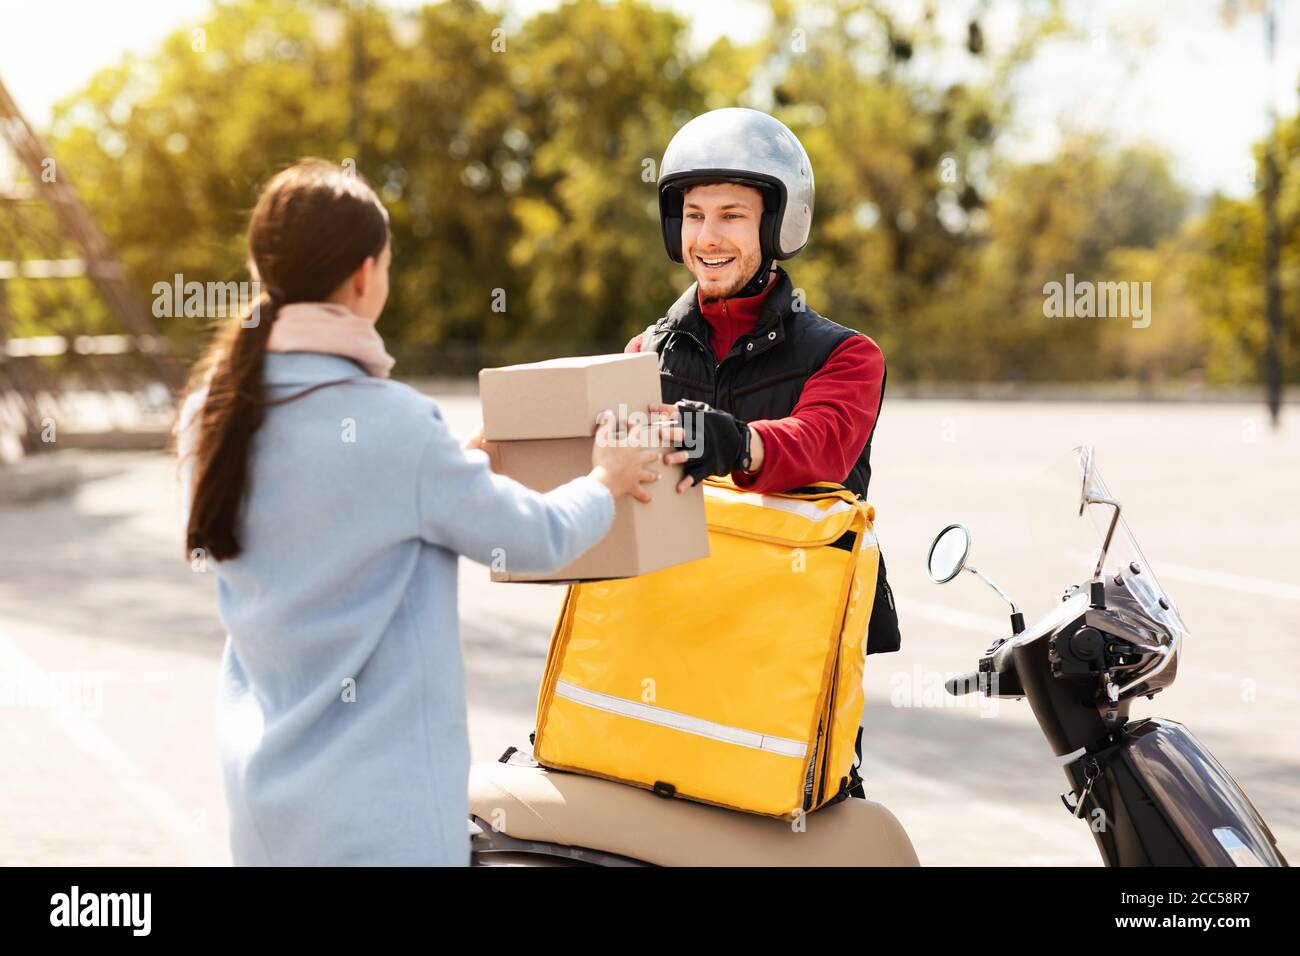 Courier Guy Delivering Parcel Boxes To Customer Outdoors Stock Photo